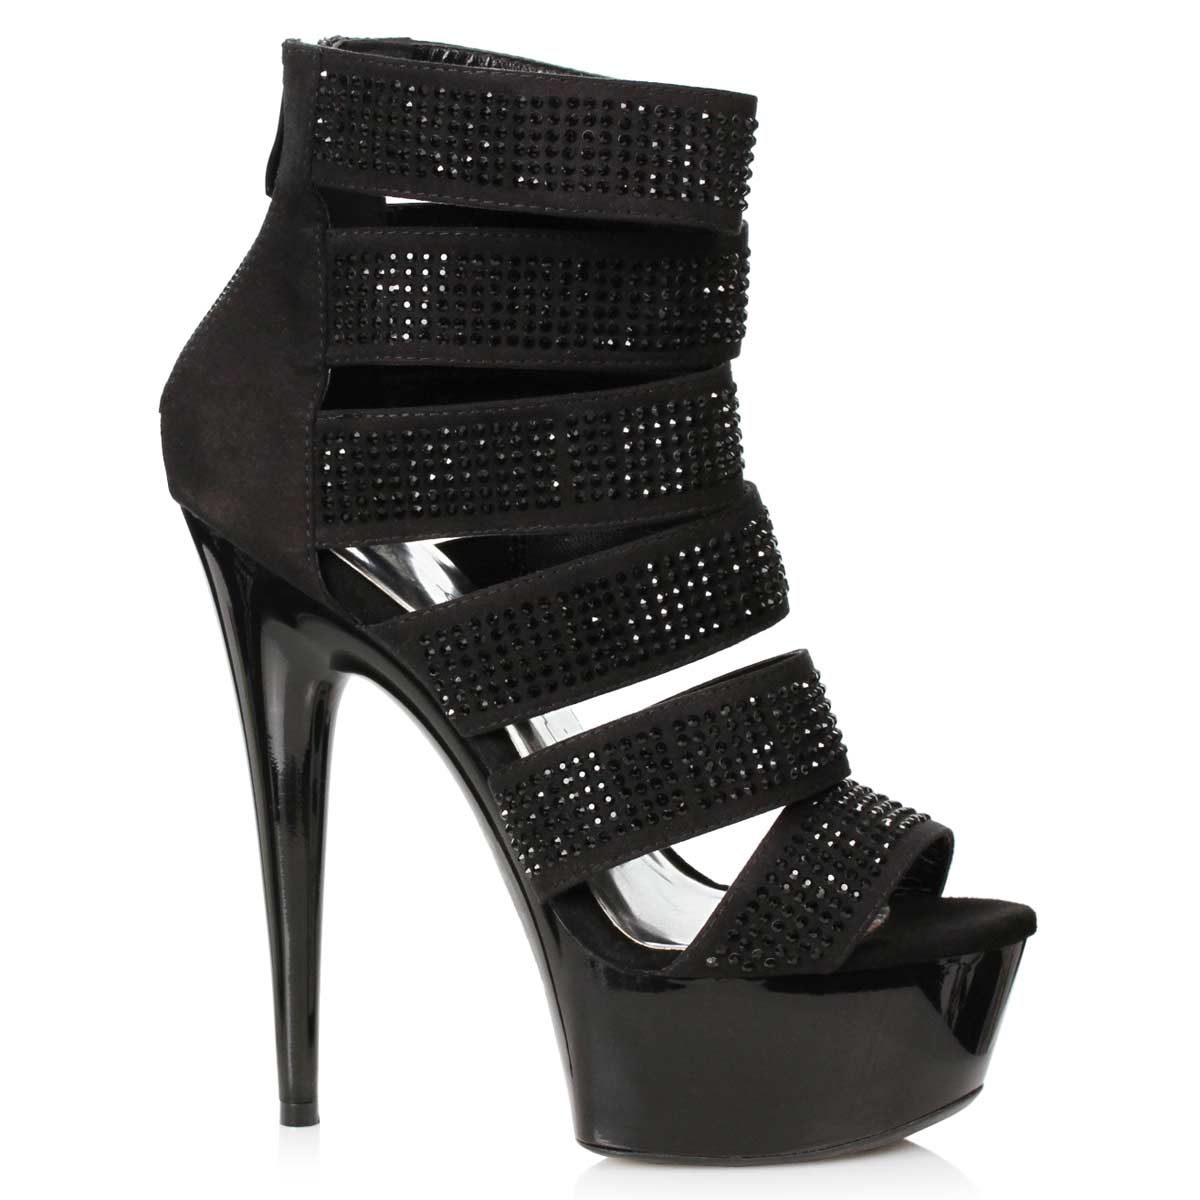 Ellie Shoes 609-MEGAN Black in Sexy Boots - $80.95